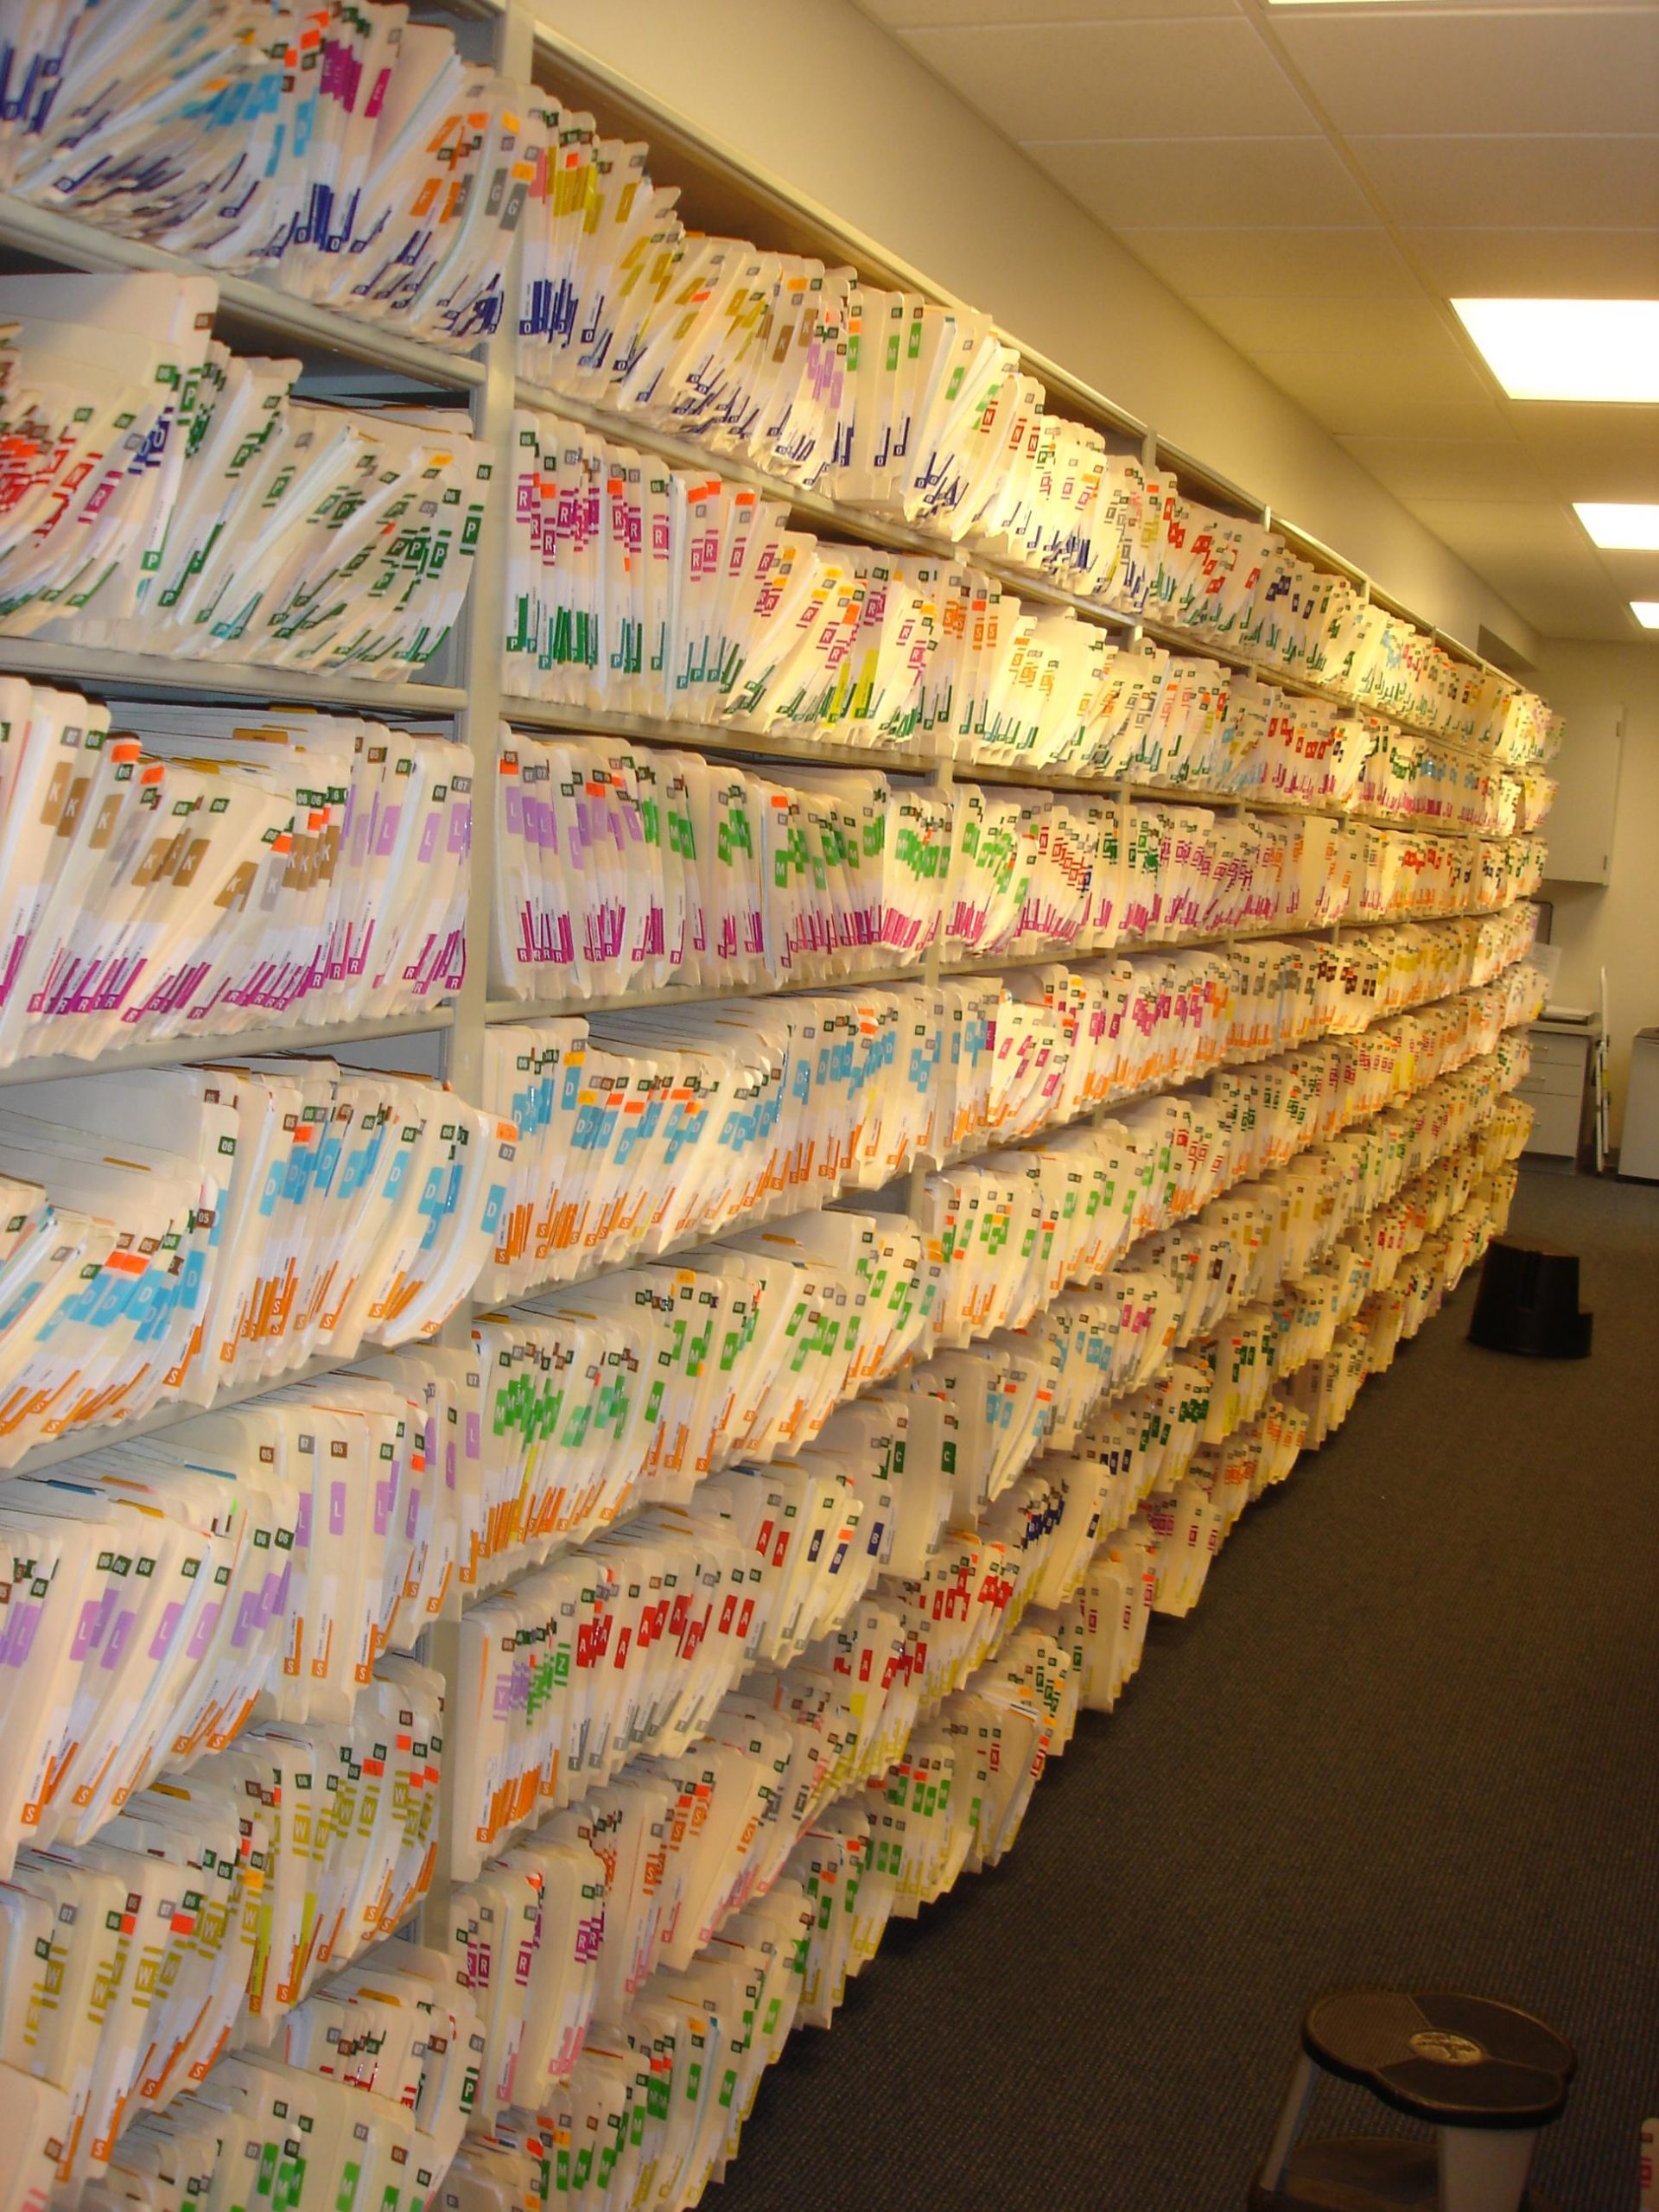 Photo of a wall of shelves filled with paper medical records